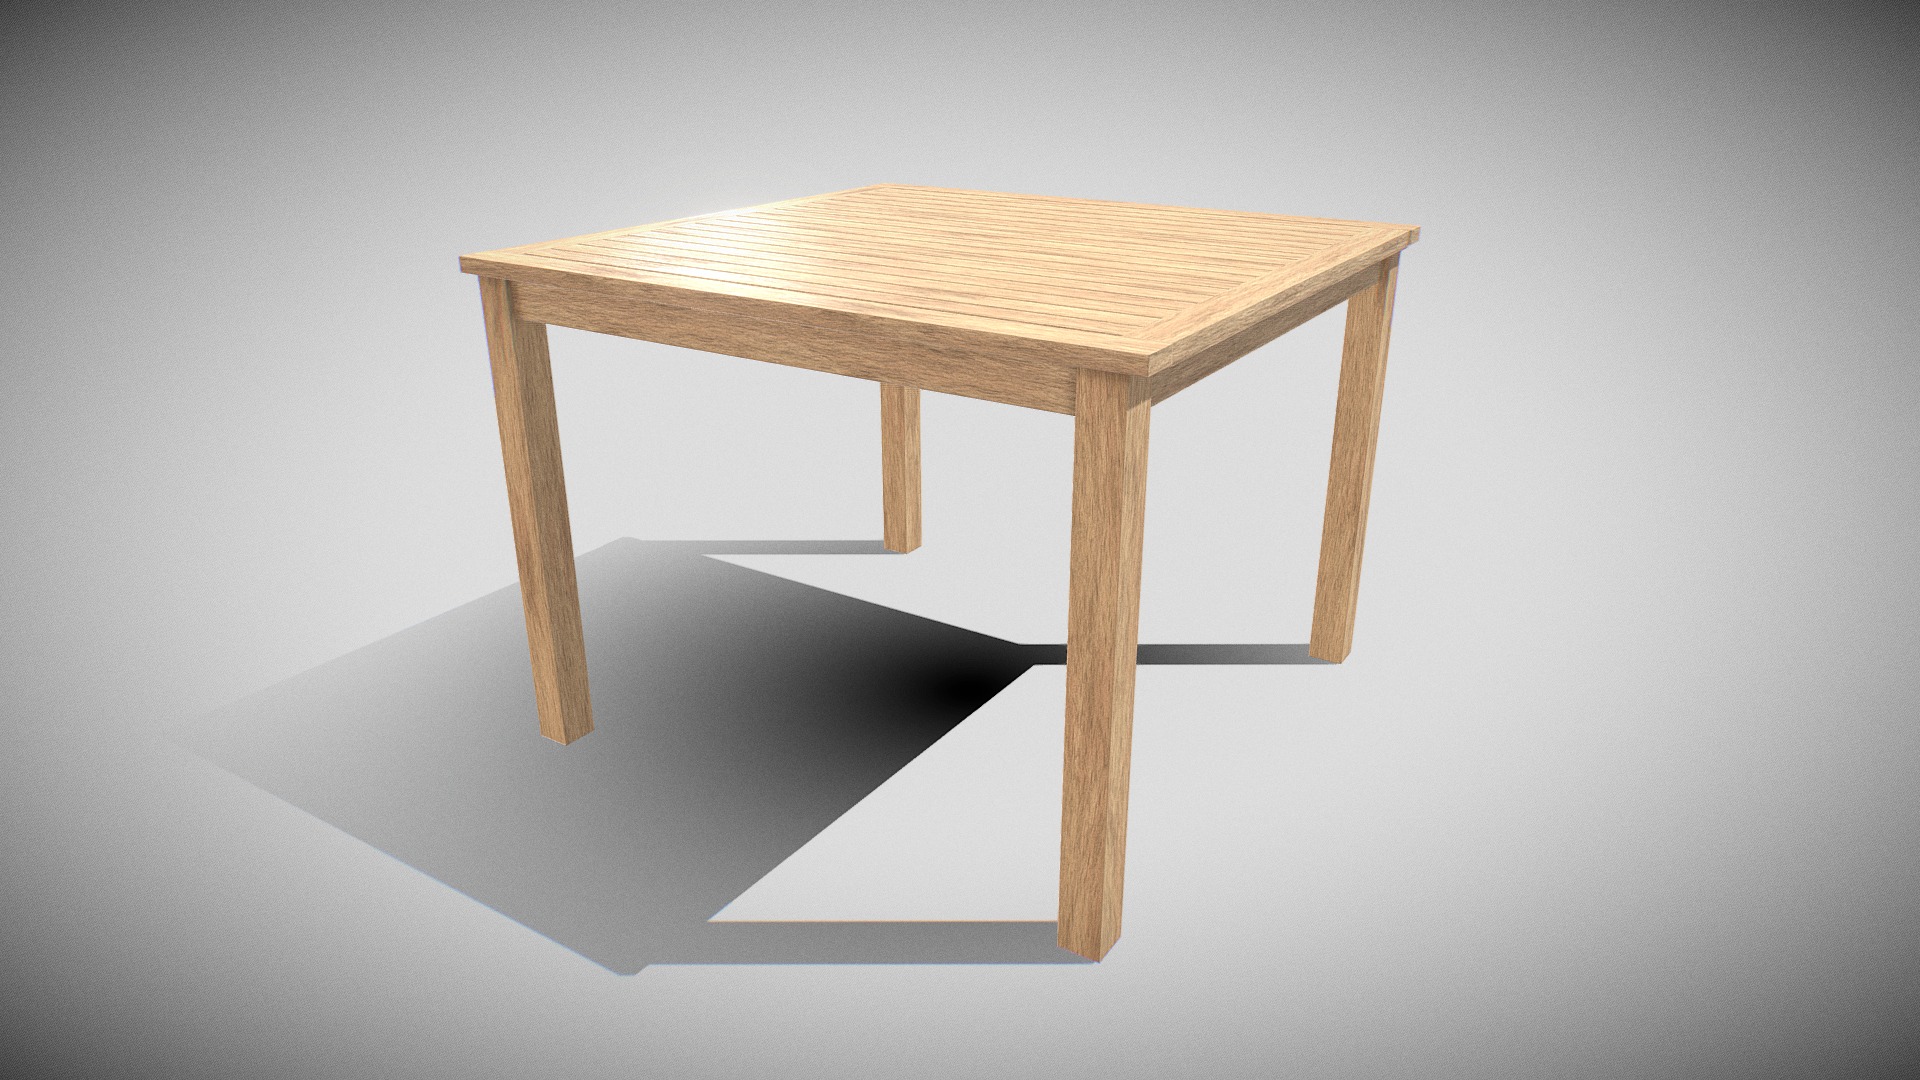 3D model Table wooden 06 - This is a 3D model of the Table wooden 06. The 3D model is about a wooden table on a white background.